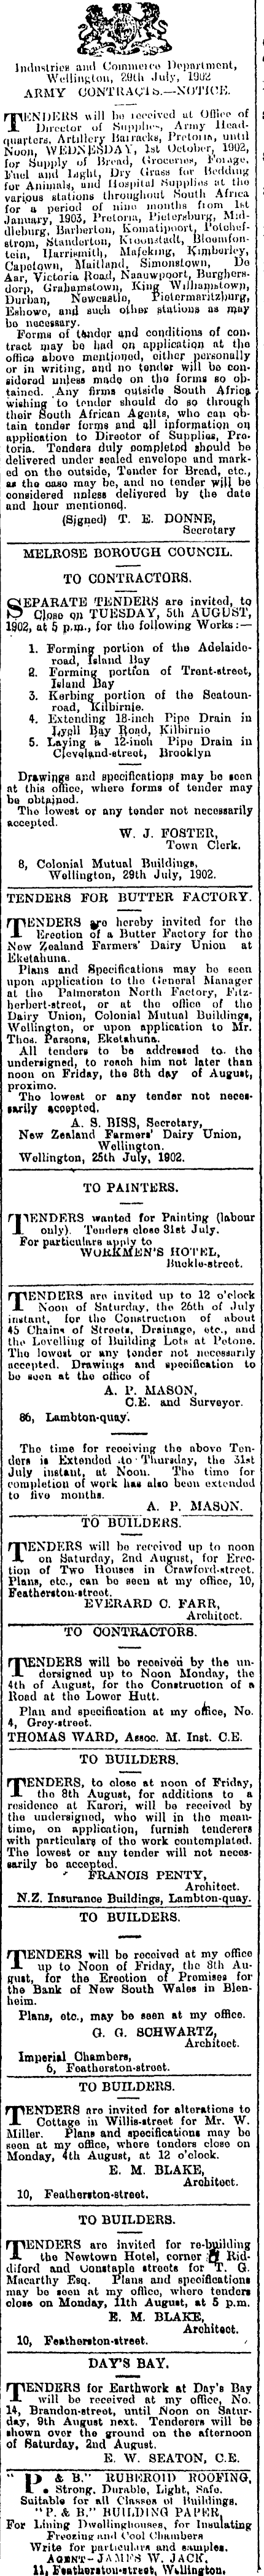 Papers Past Newspapers Evening Post 30 July 1902 Page 7 Advertisements Column 6